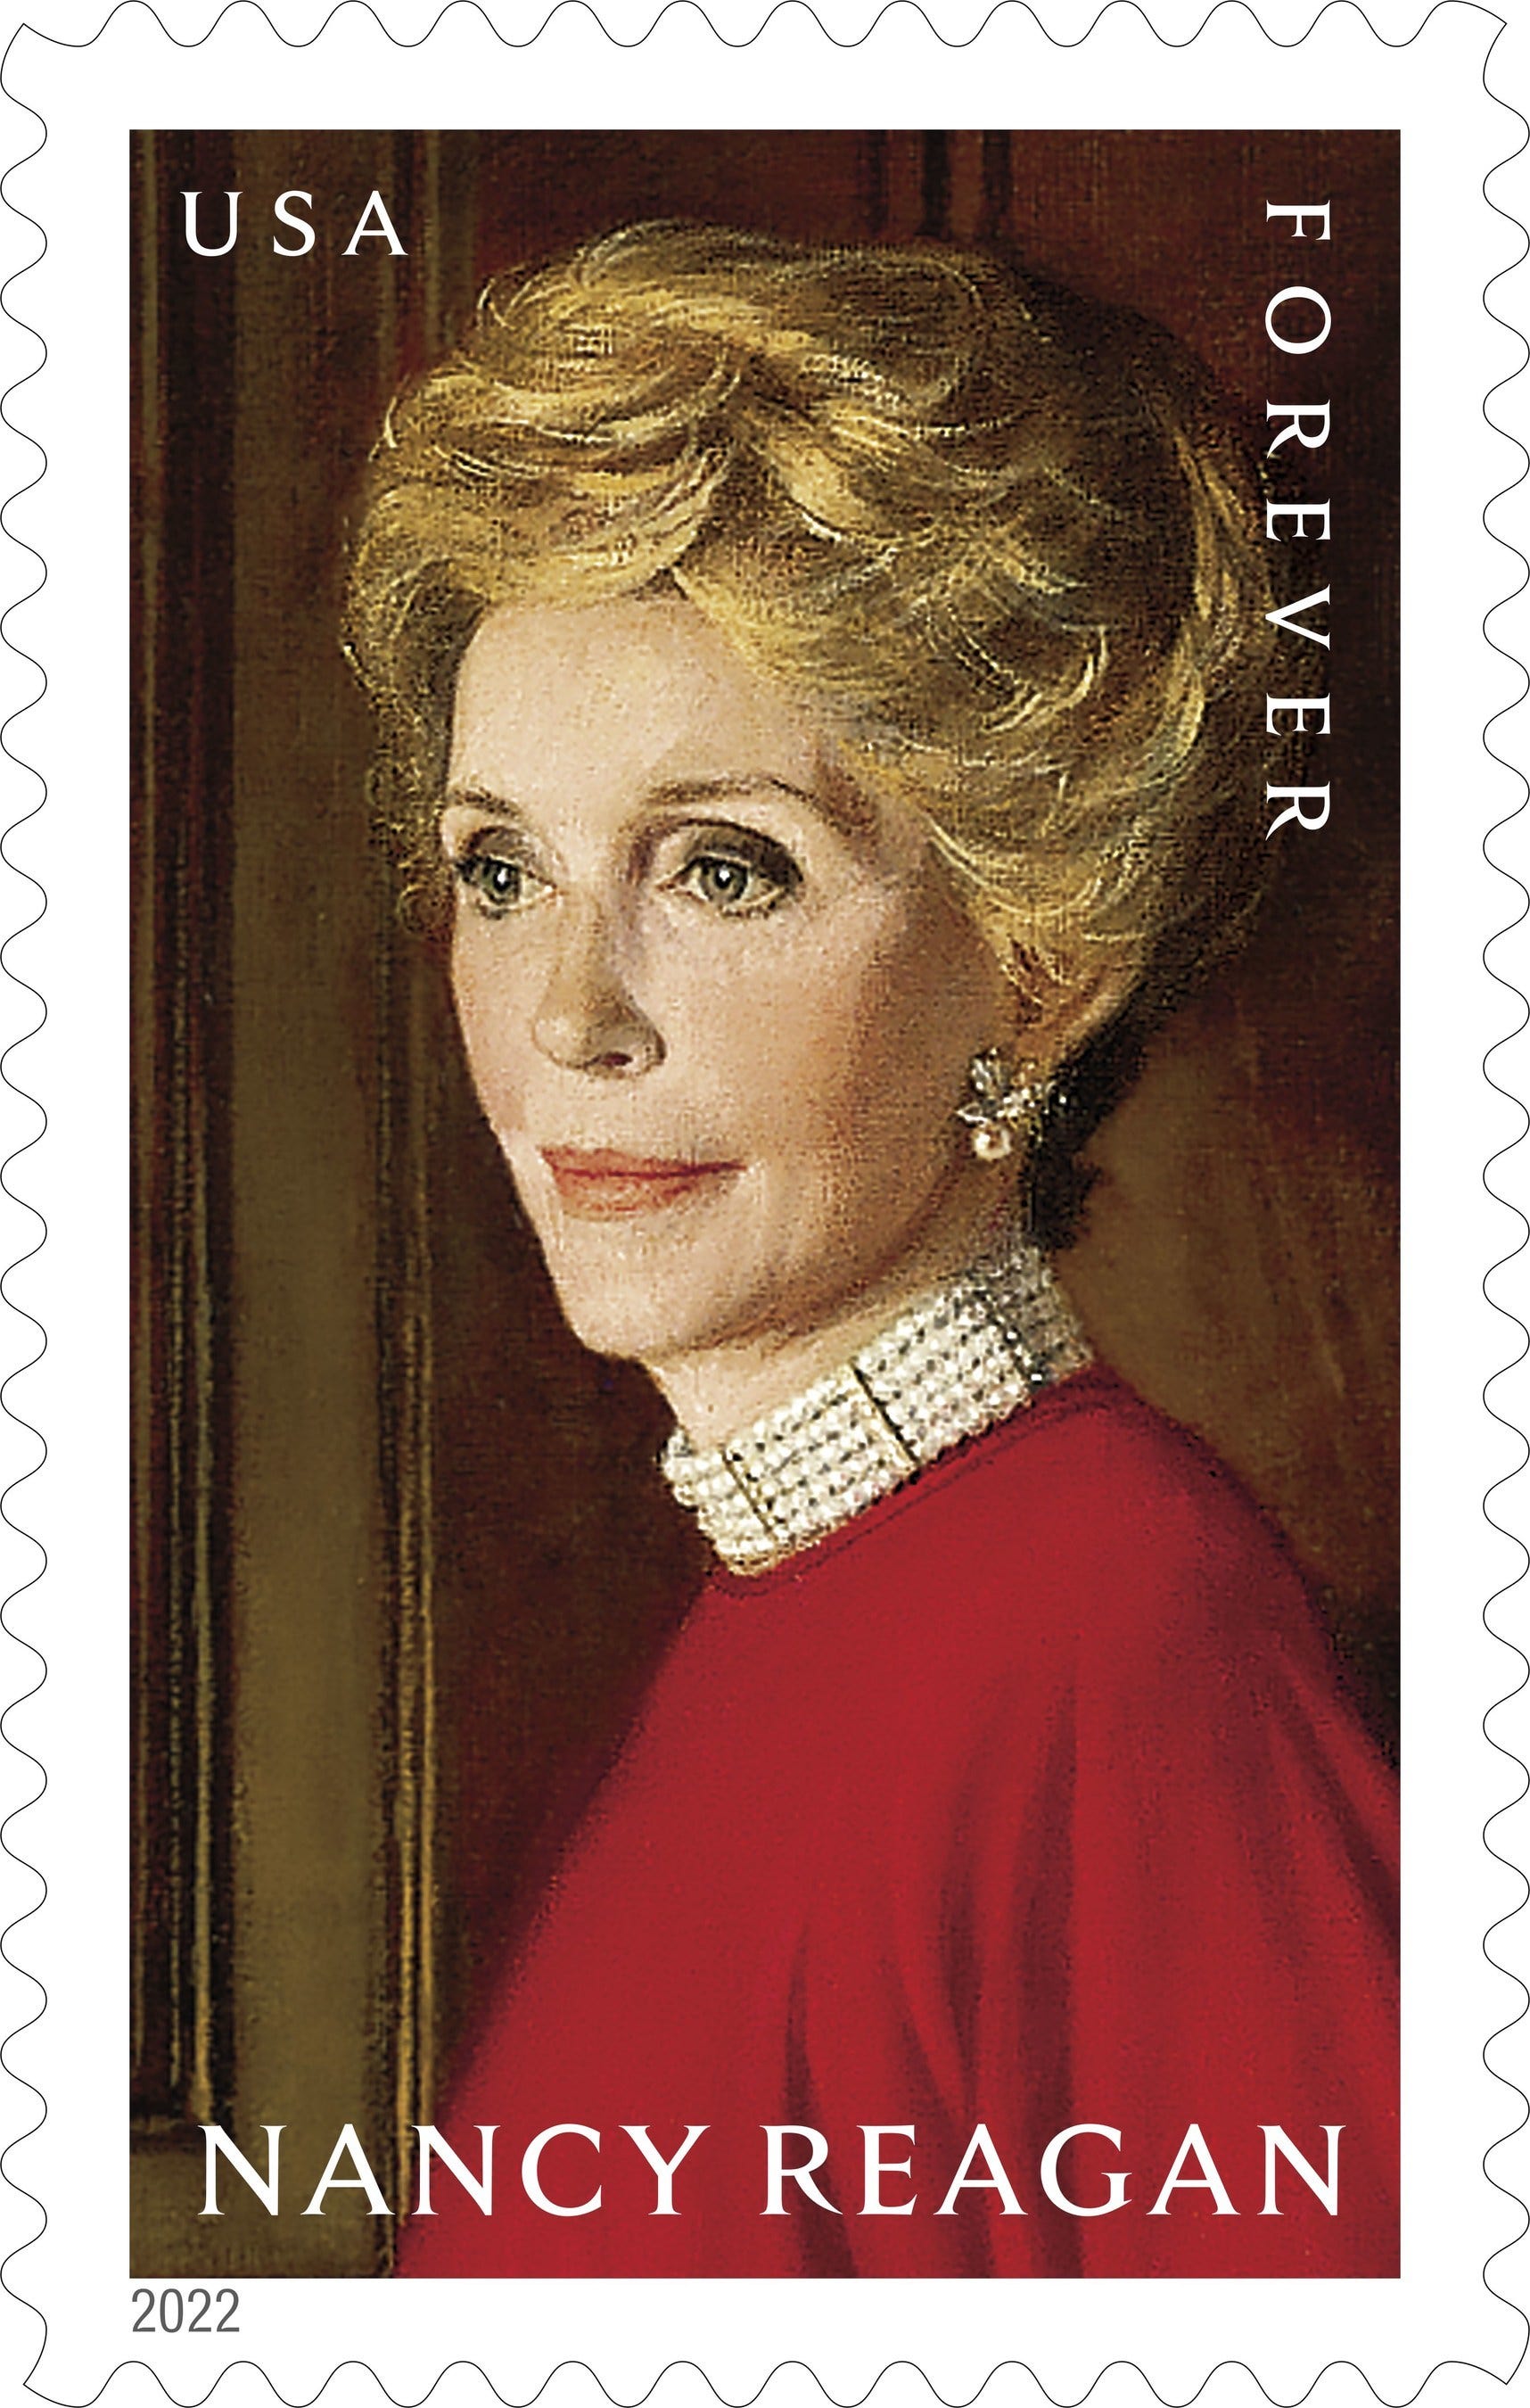 Nancy Reagan, former first lady, is honored with new ‘Forever Stamp’